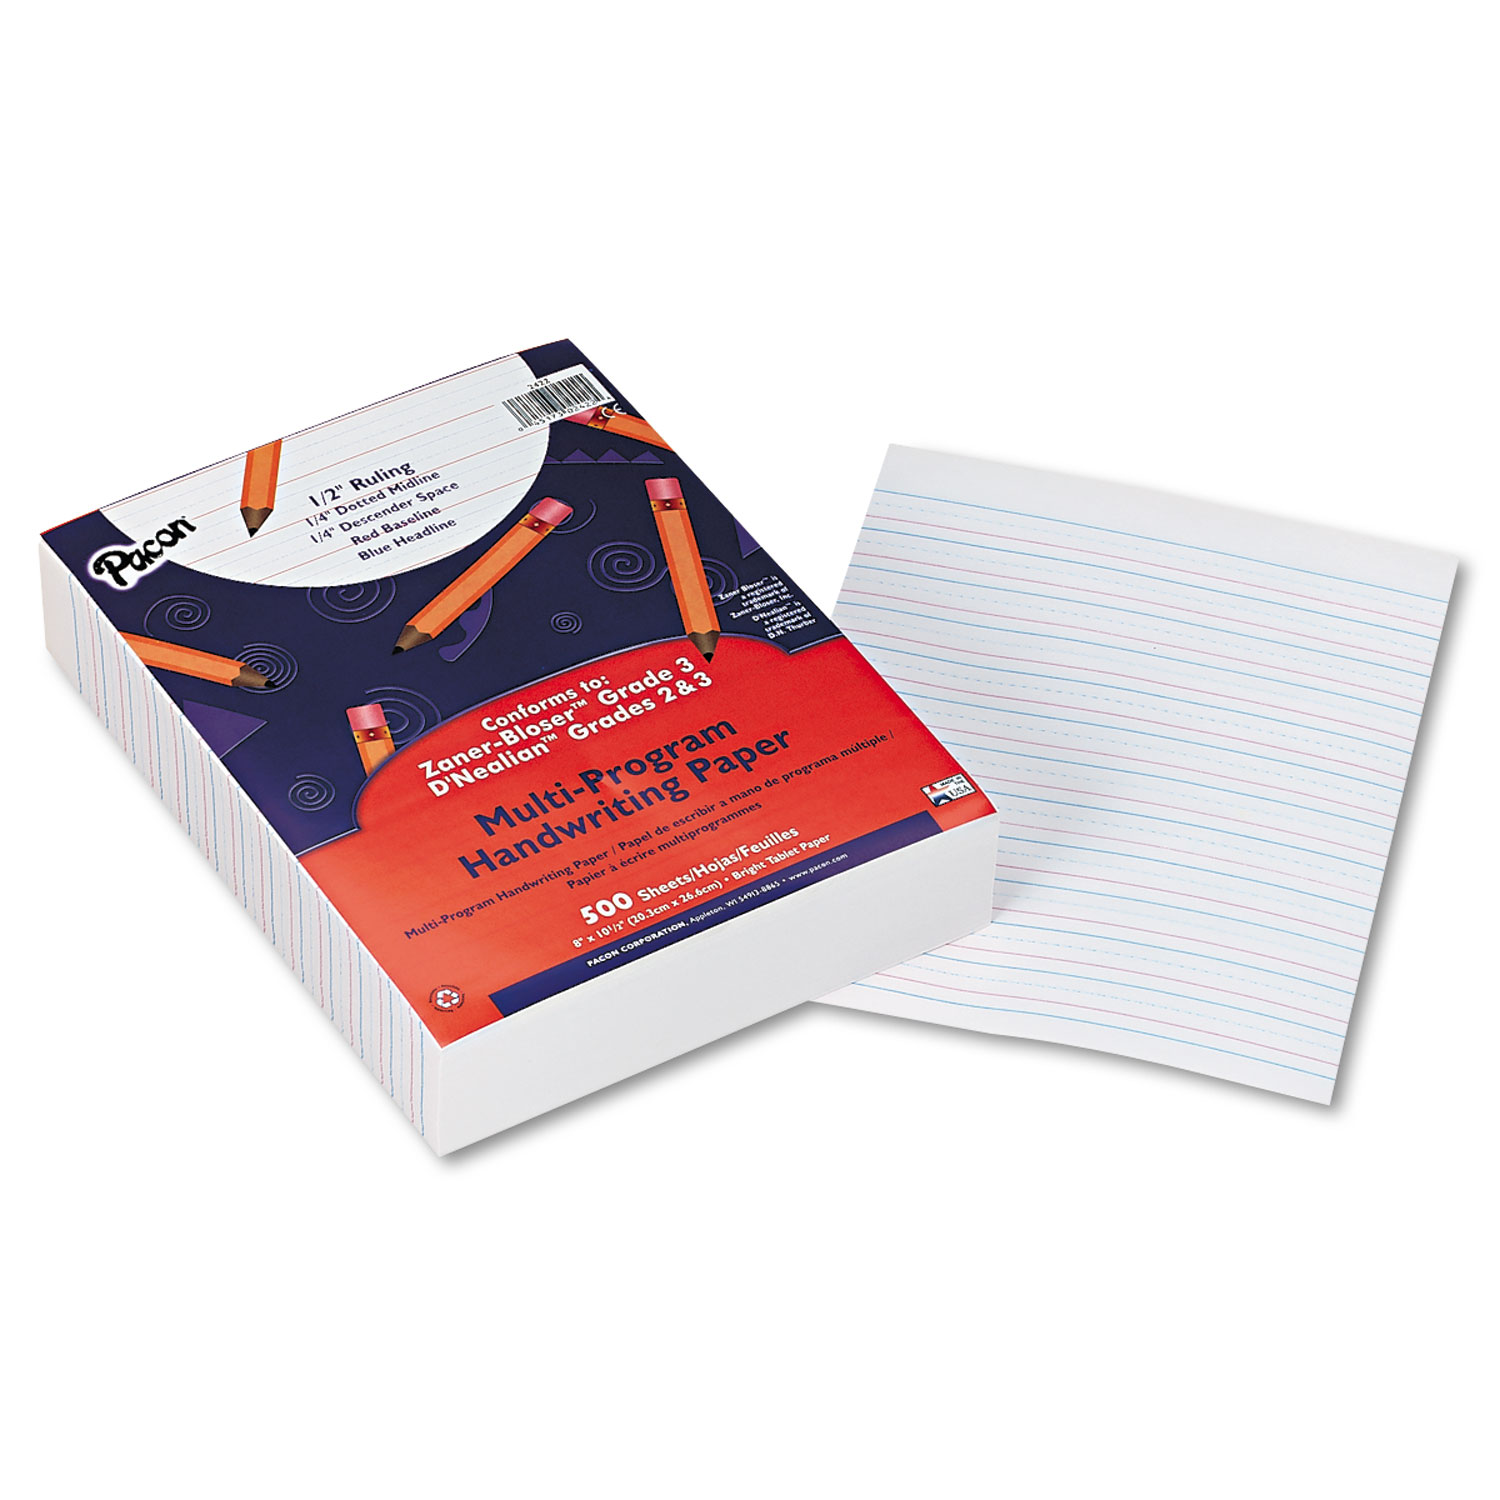  Pacon 2422 Multi-Program Handwriting Paper, 16 lb, 1/2 Short Rule, One-Sided, 8 x 10.5, 500/Pack (PAC2422) 